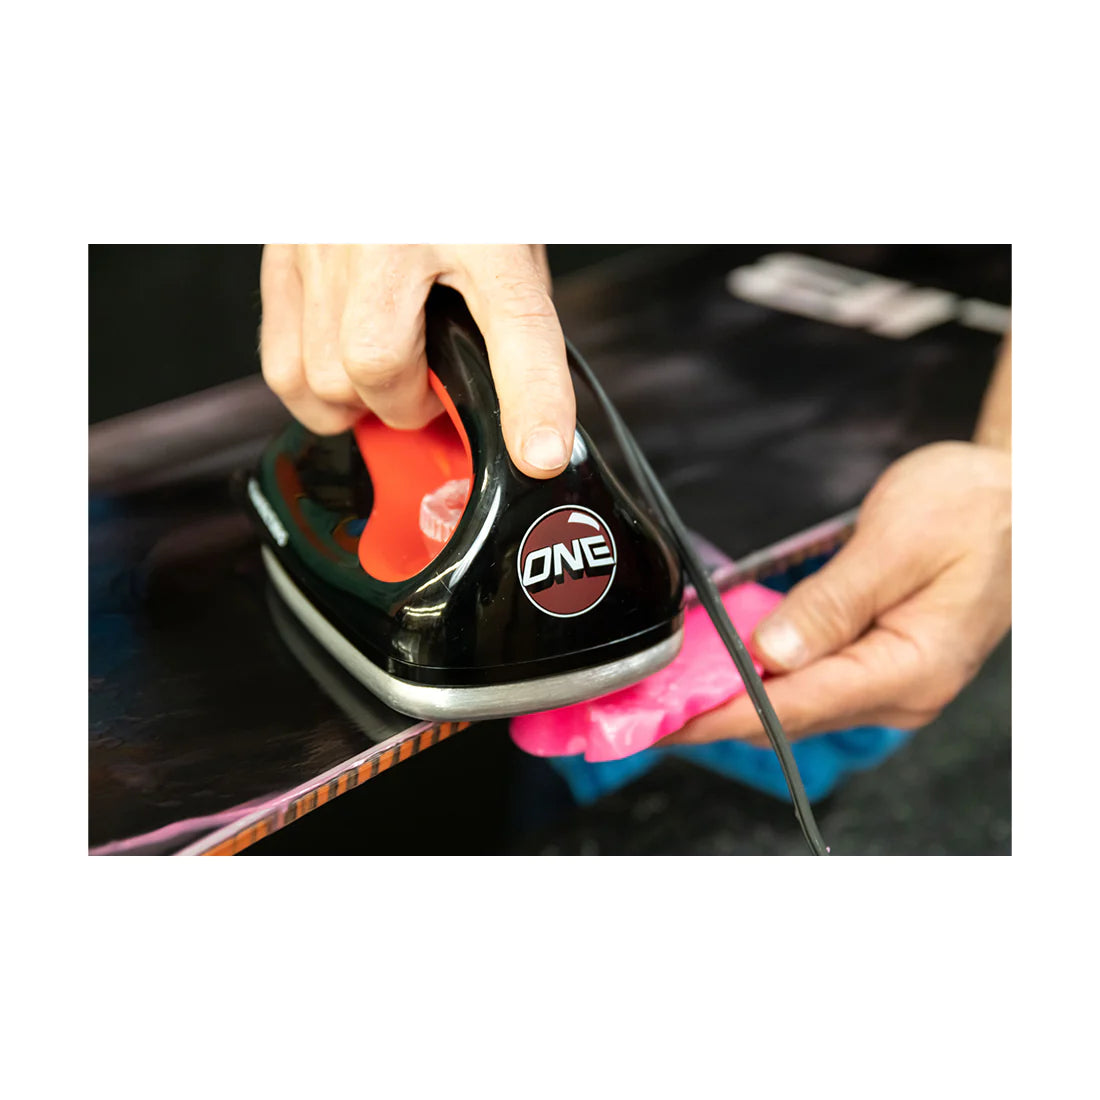 One Ball HOT WAX IRON FOR SNOWBOARDS / SKIS BOUNS "WAX INCLUDED"